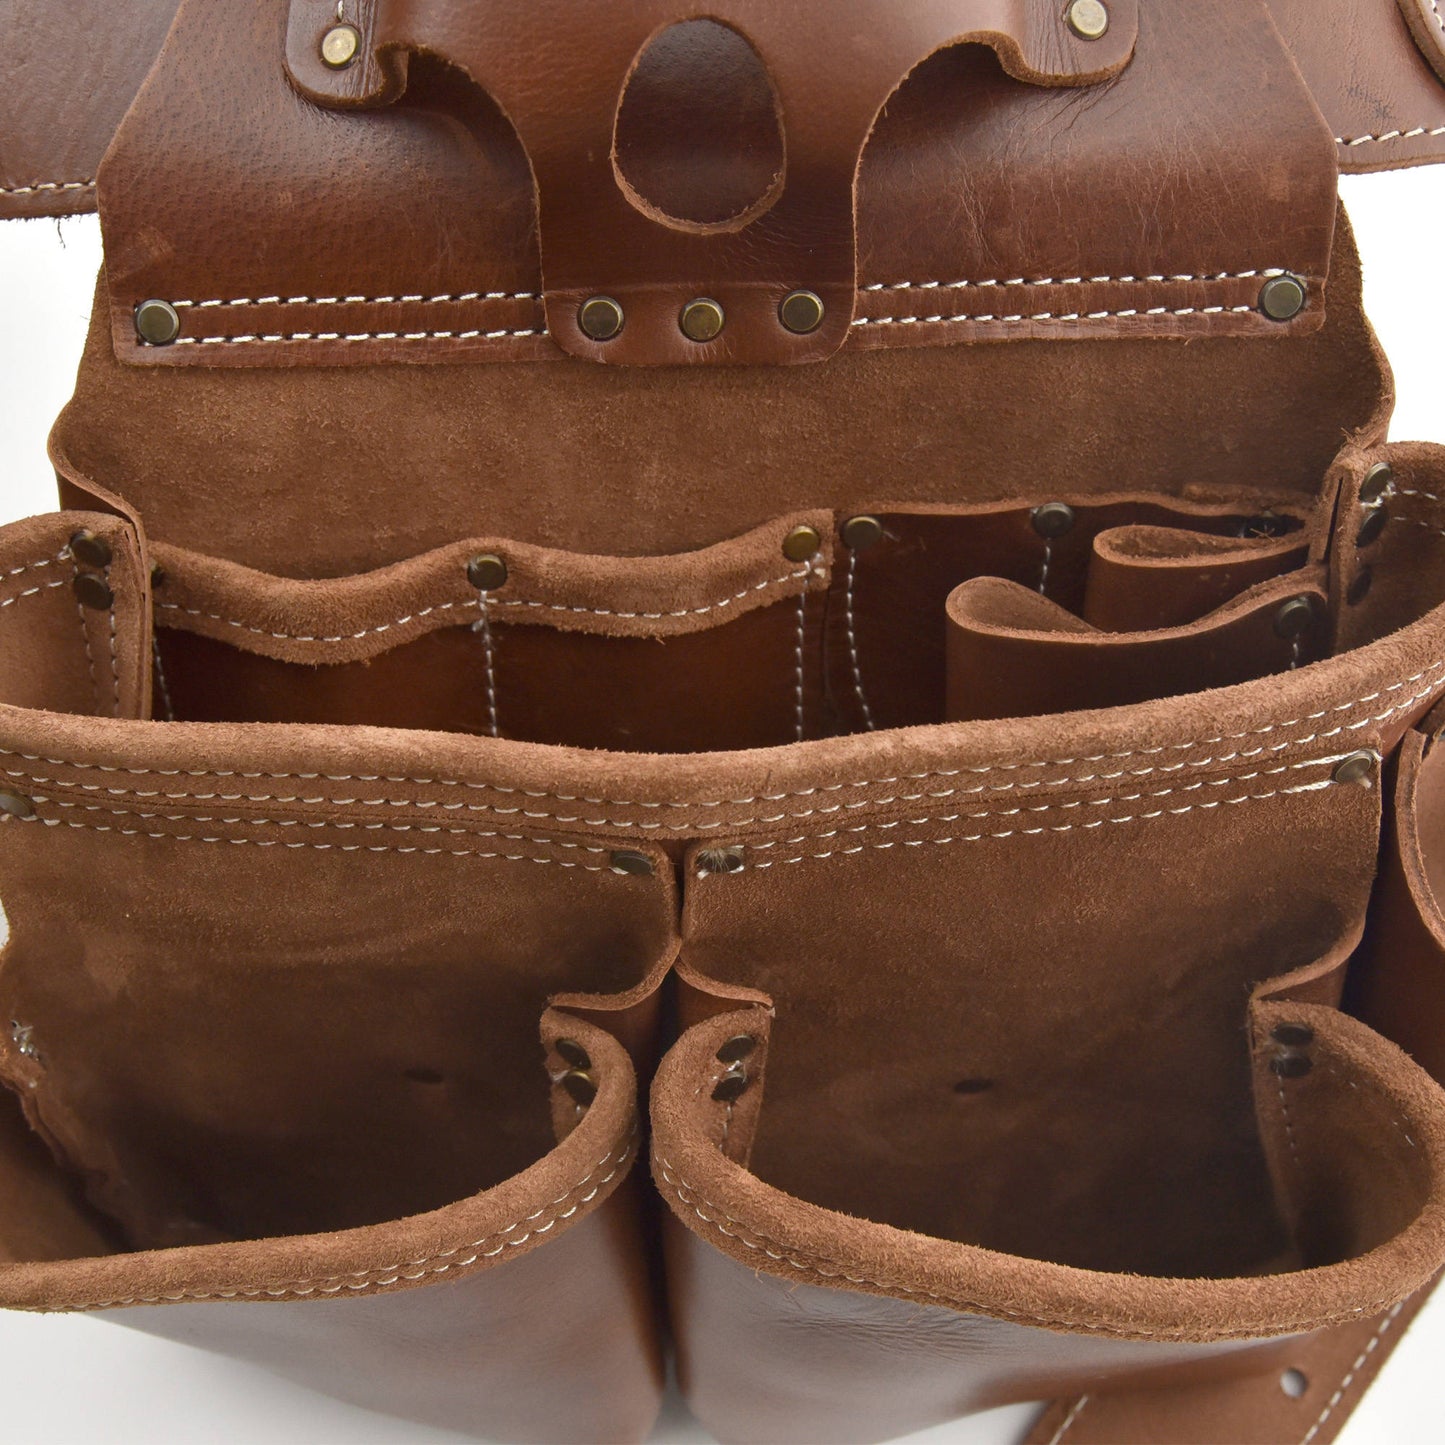 Style n Craft's 98444 - Inside View of the Right Side Pouch of the 4 Piece 19 Pocket Pro Framer’s Combo in Top Grain Leather in Dark Tan Color